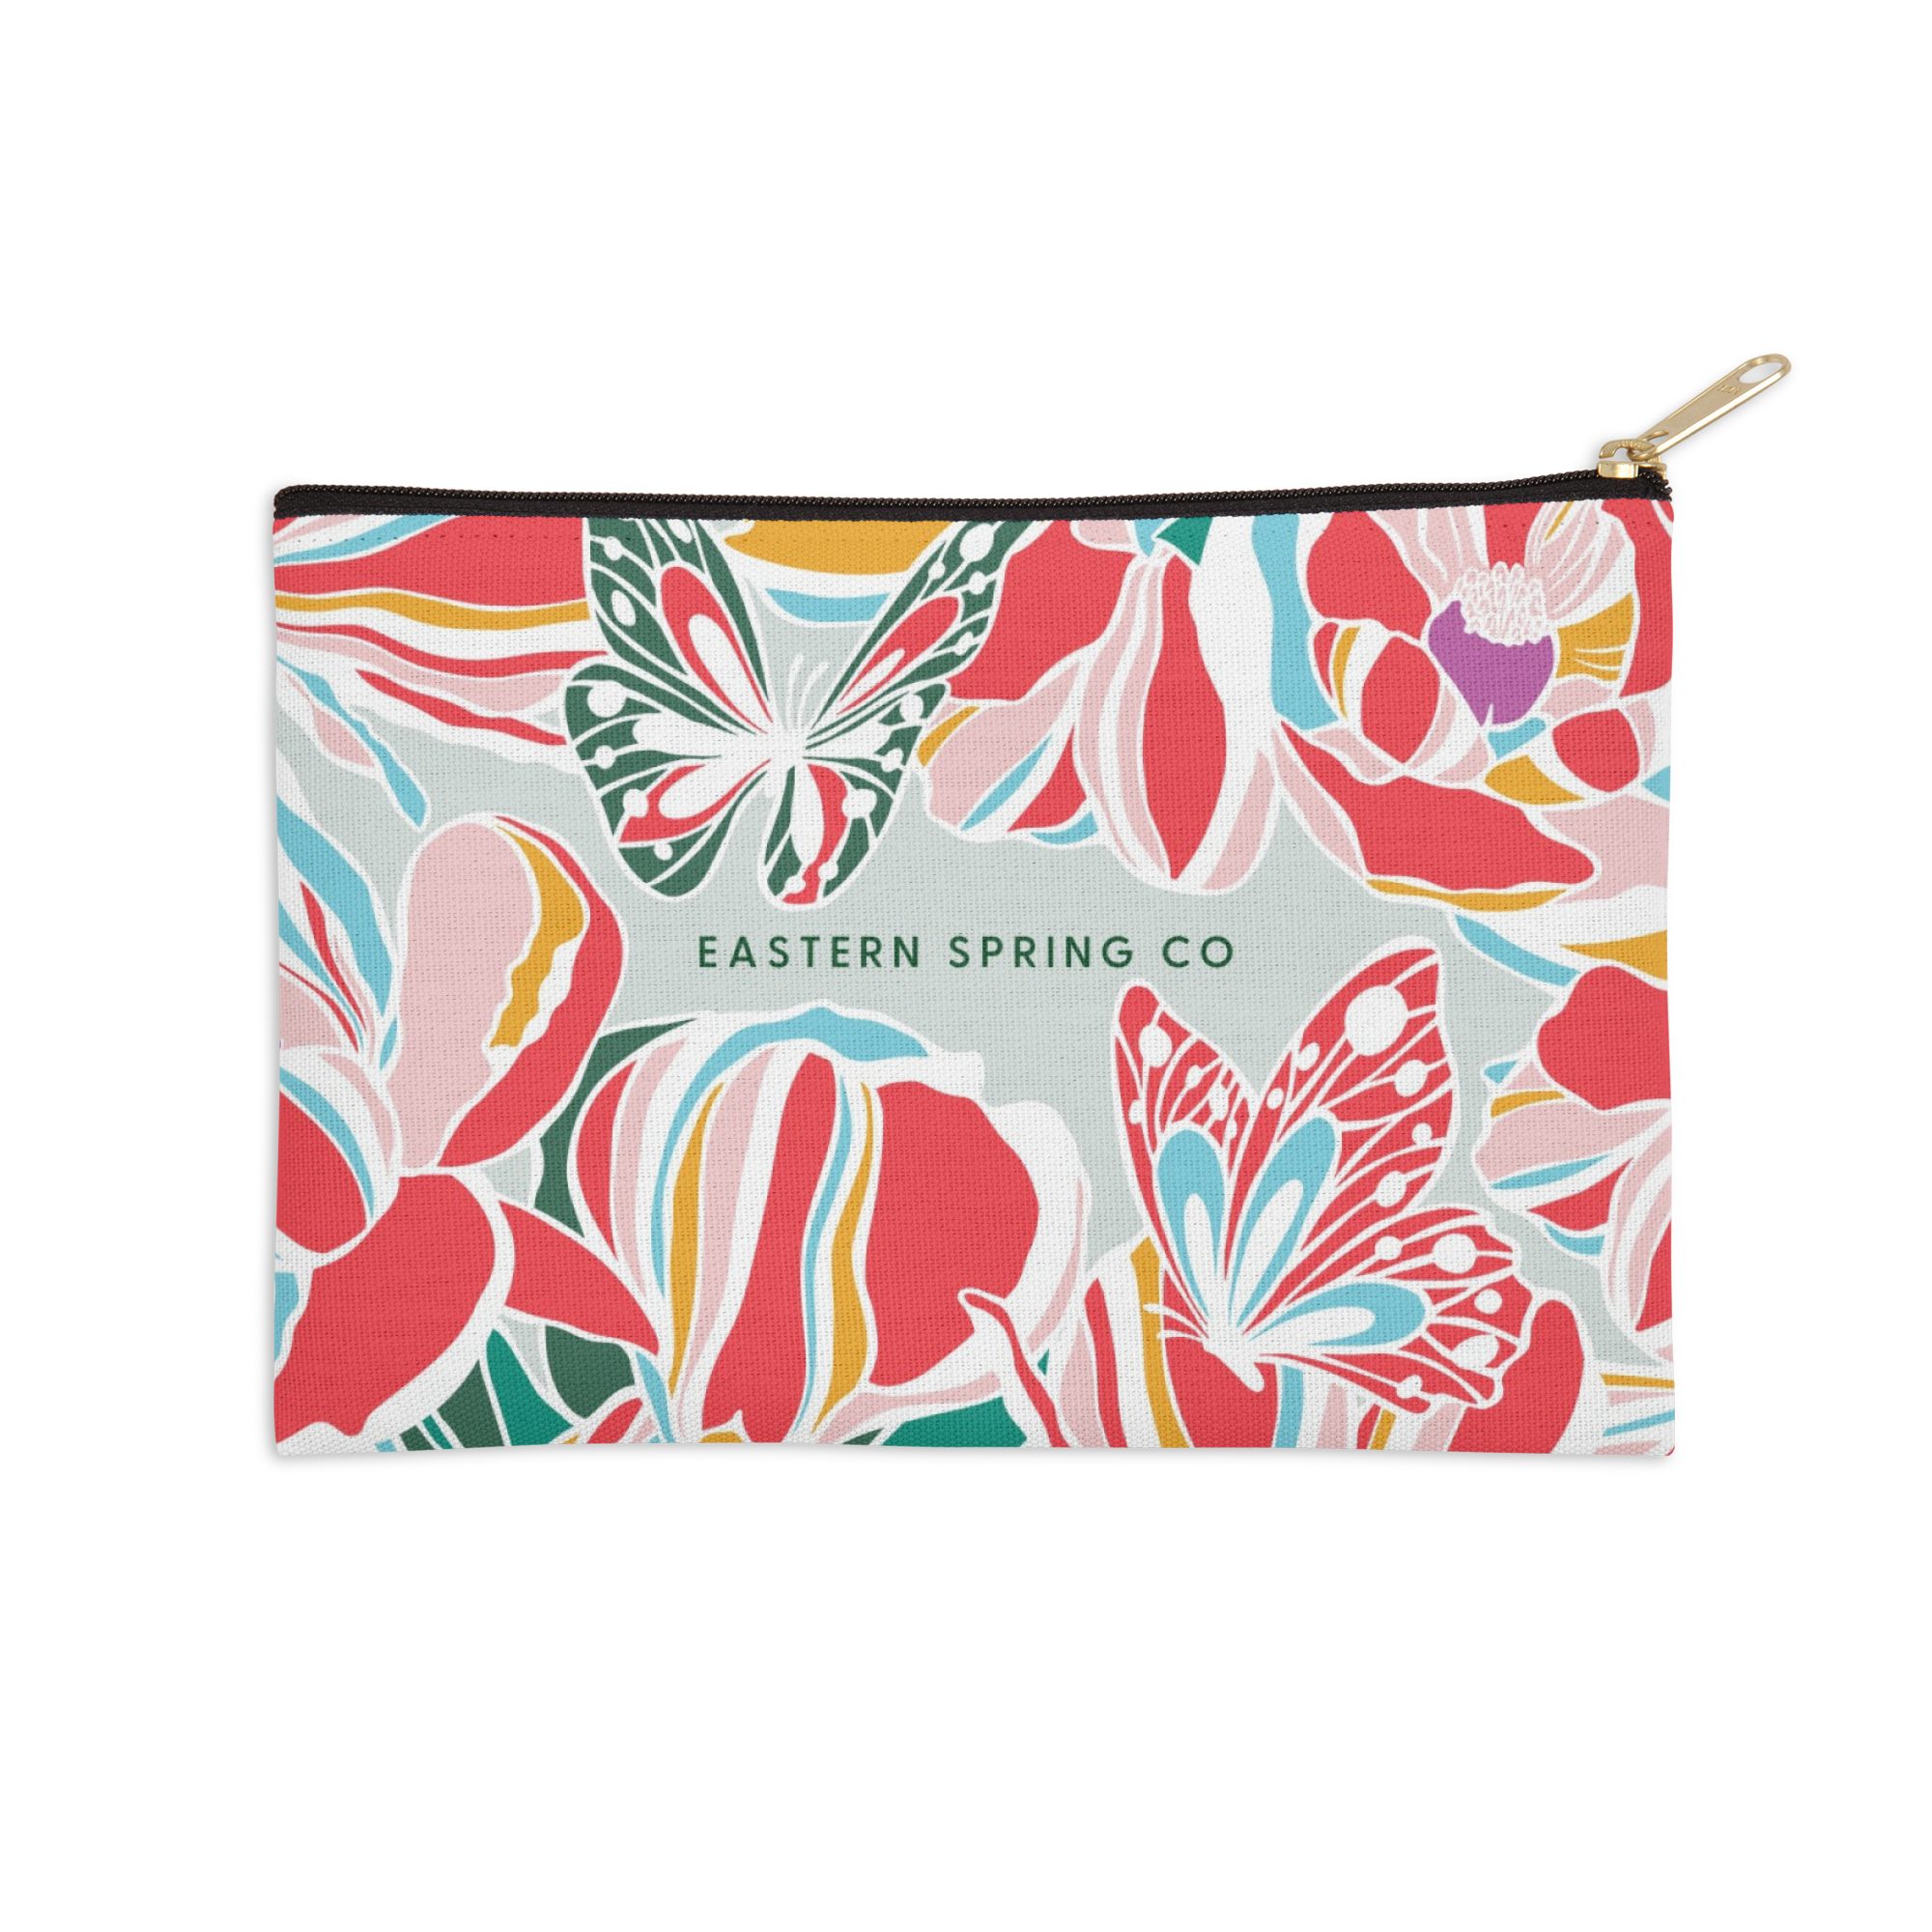 THE MAGNOLIAS AND BUTTERFLIES, Zip pouch